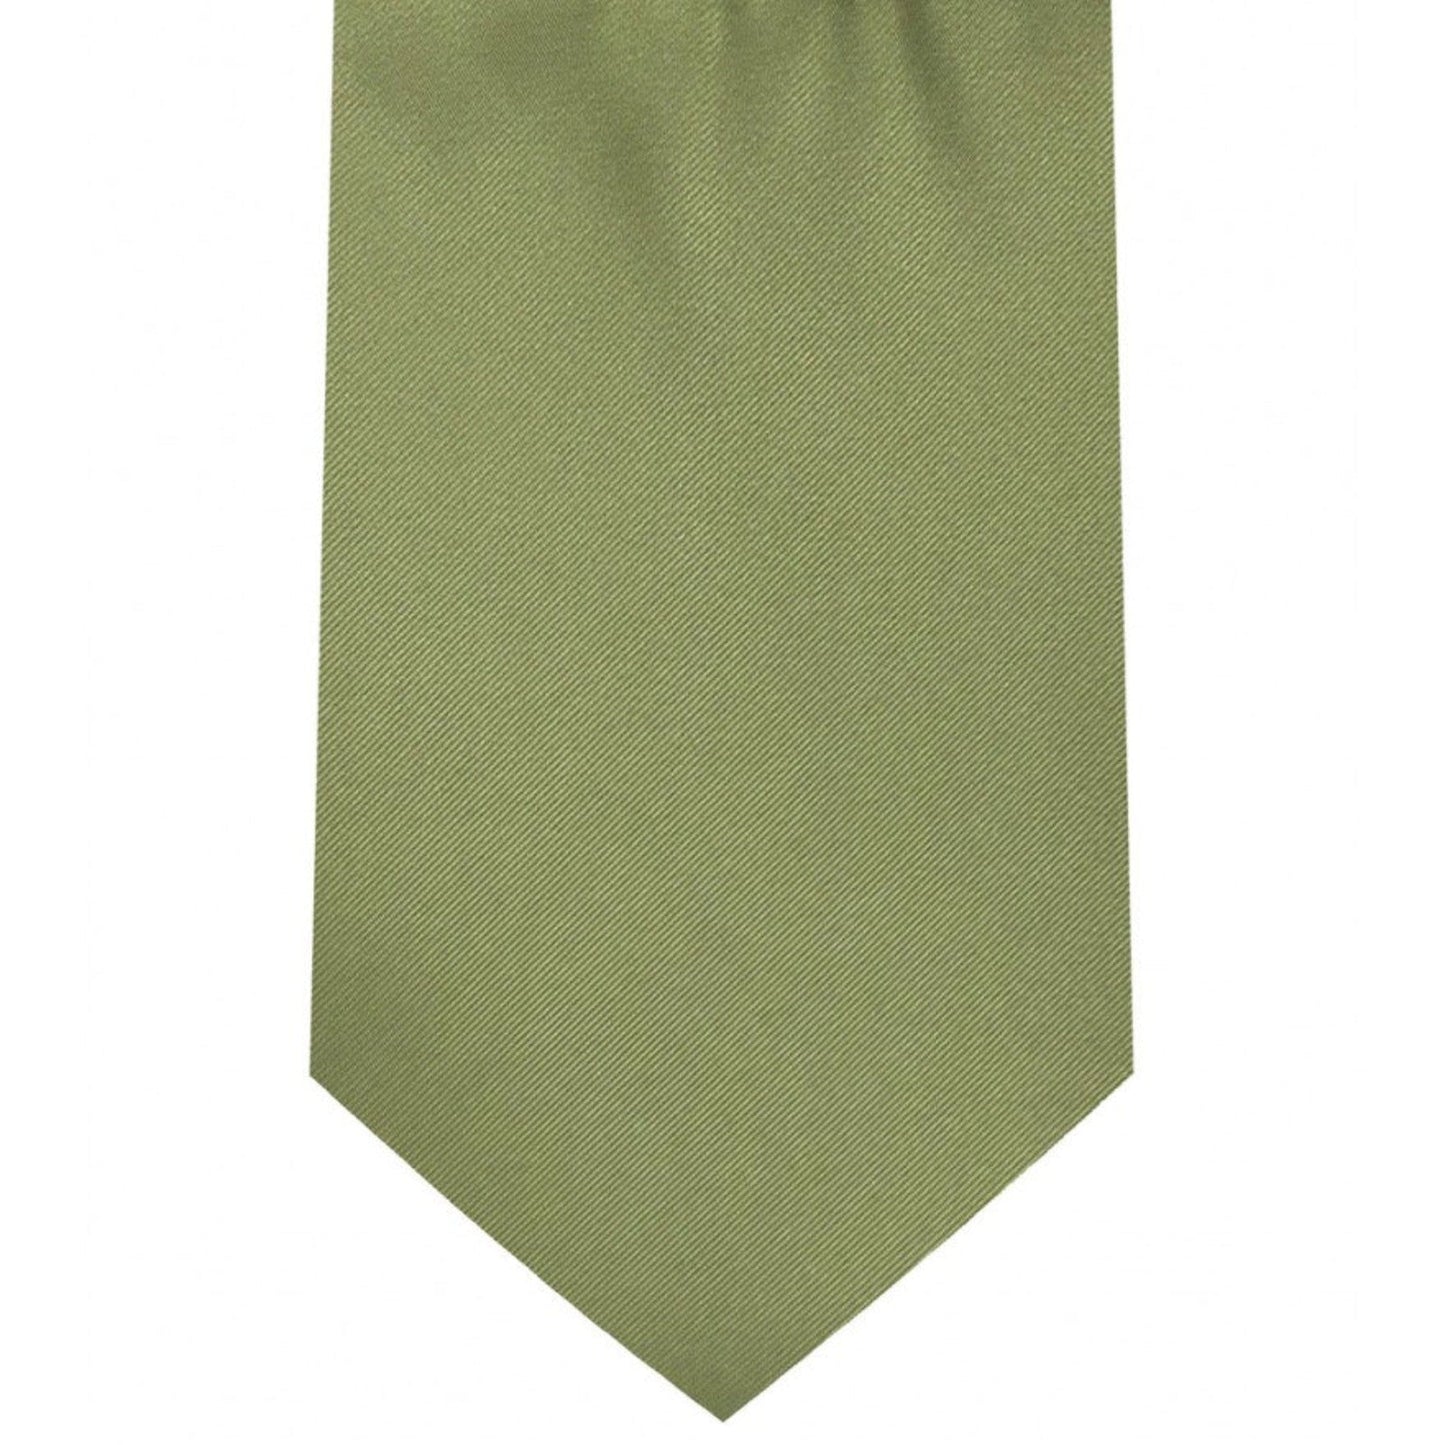 Classic Olive Green Tie Regular width 3.5 inches With Matching Pocket Square | KCT Menswear